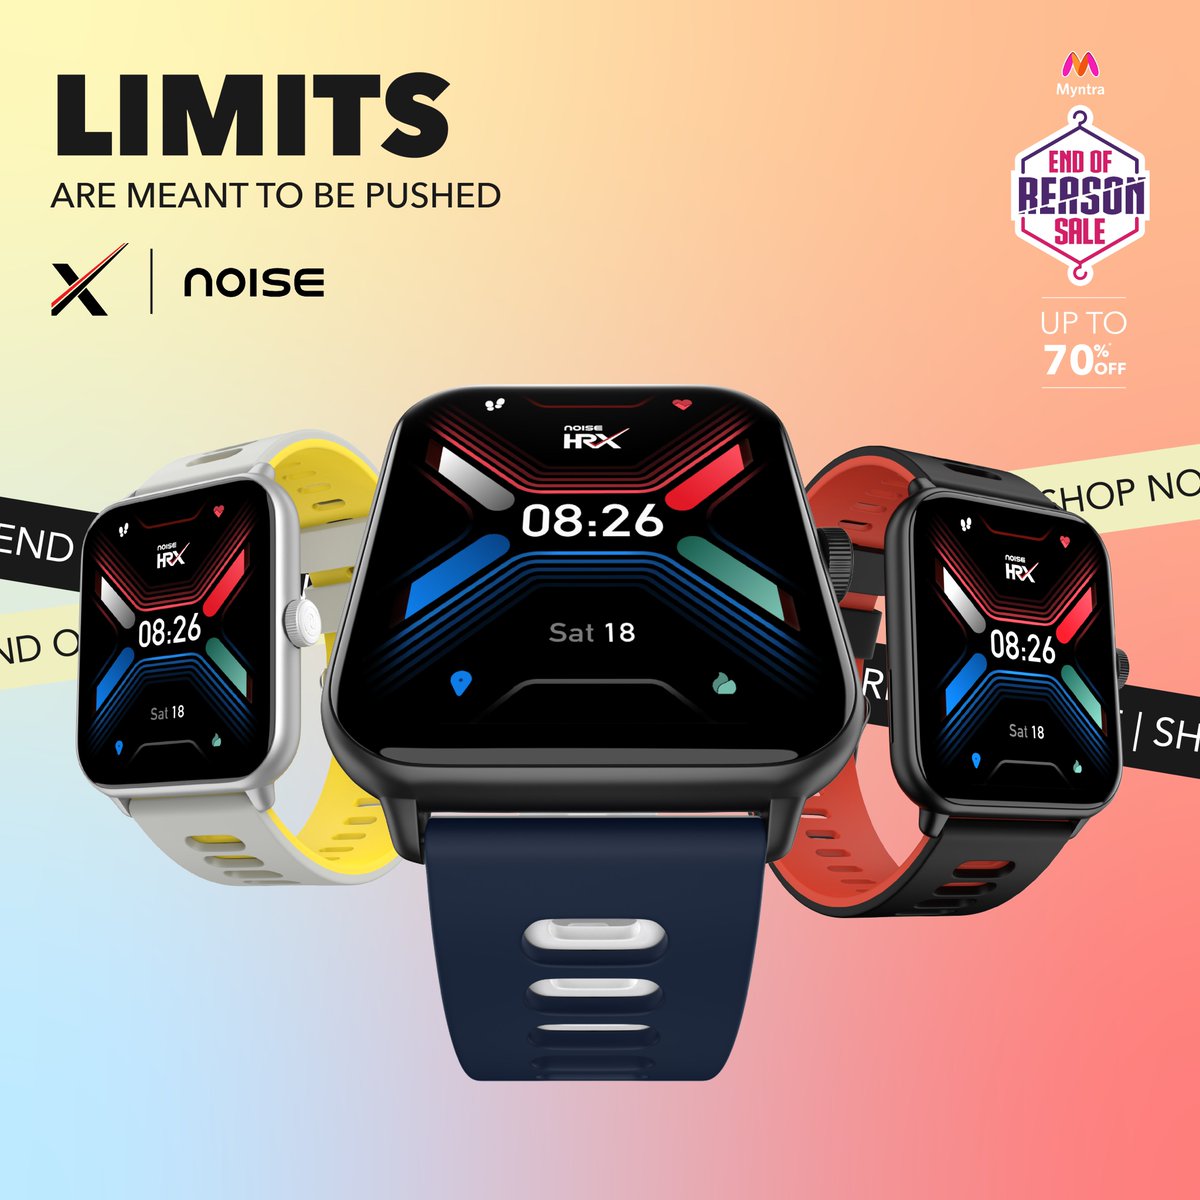 SPRINT YOUR WAY TO 70% OFF 💯

HRX @gonoise Sprint comes packed with cutting edge features that belong on your wrist. Explore them and get yours now at the @myntra End of Reason Sale from the link below👇
bit.ly/HRXSprintSale

#MyntraEORSisLIVE #HRXSprint #Noise